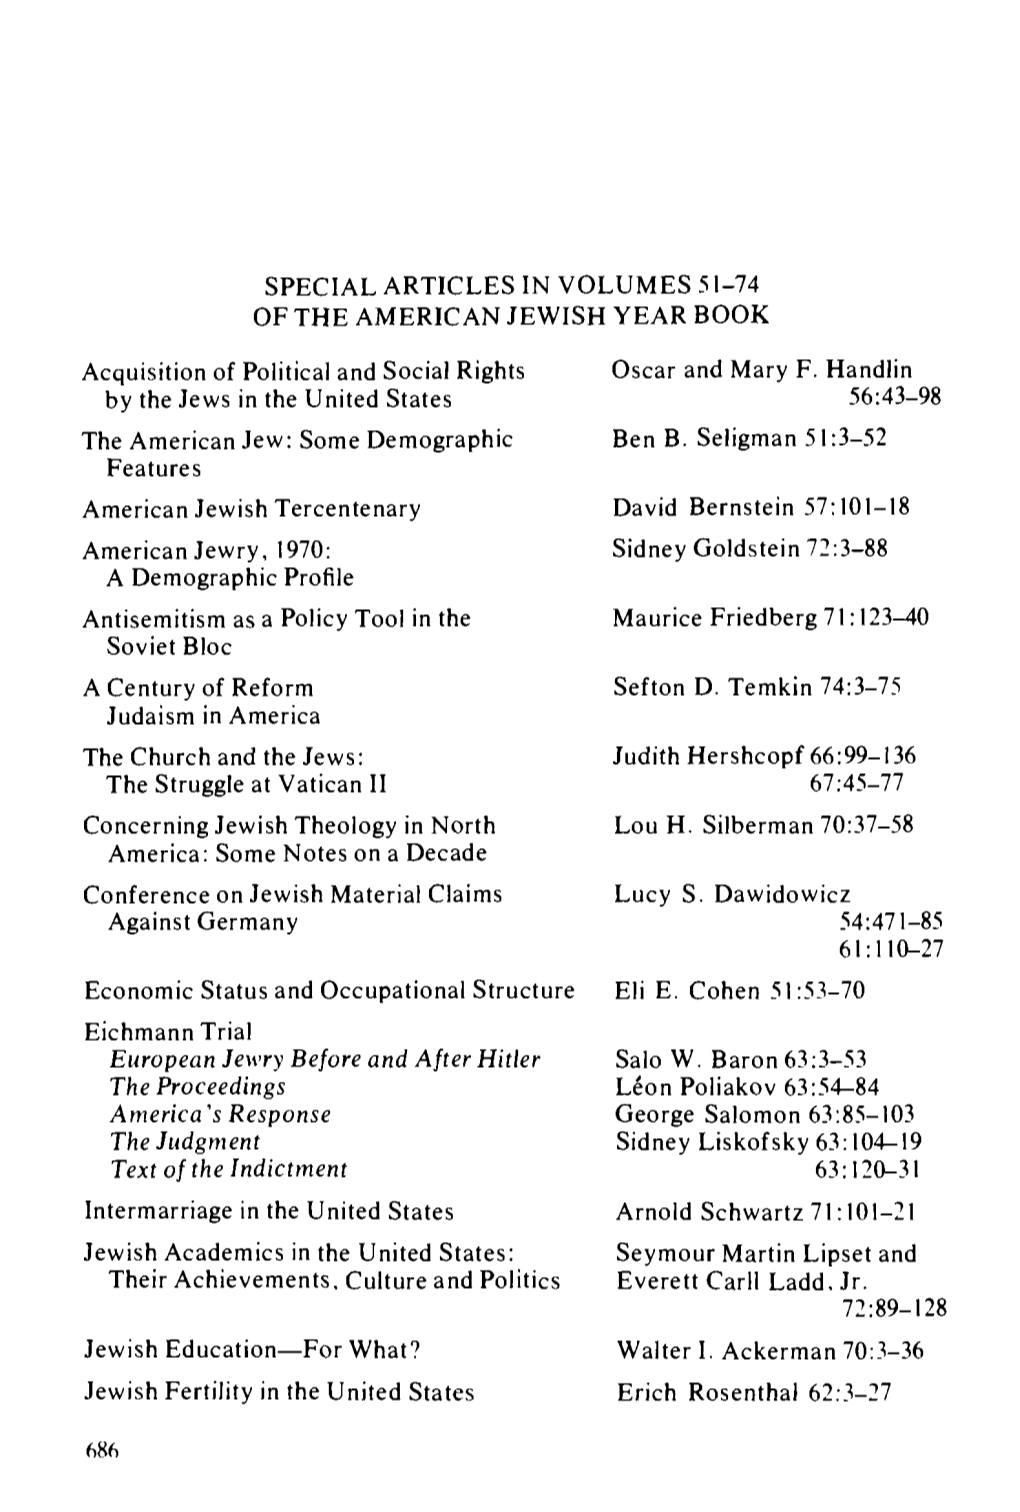 Special Articles in Volumes 51-74 of the American Jewish Year Book